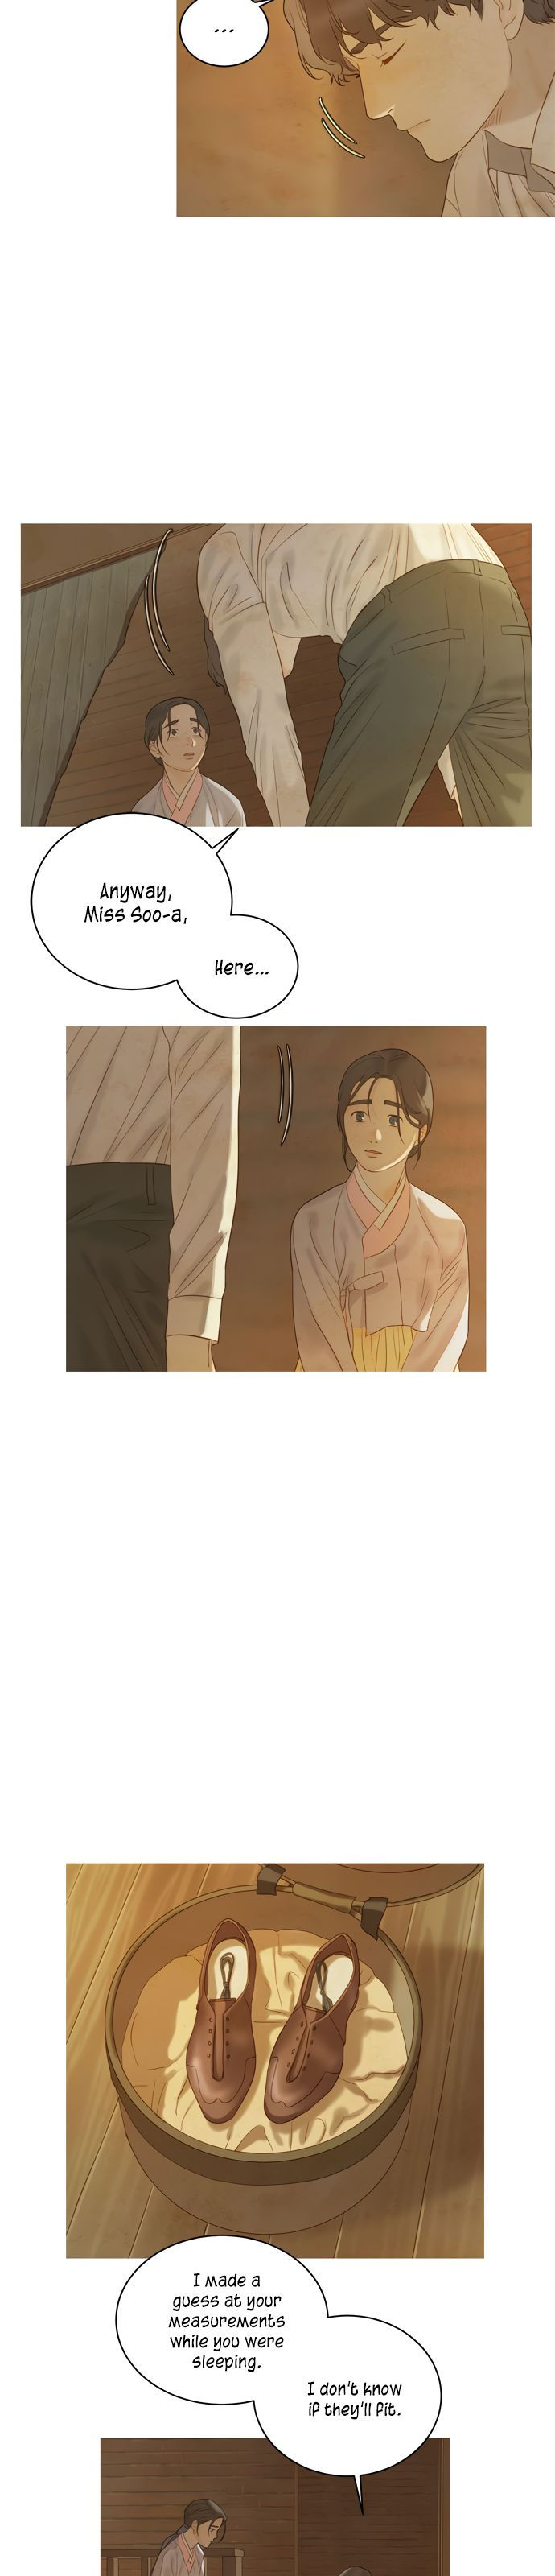 Gorae Byul - The Gyeongseong Mermaid - Chapter 23 Page 10